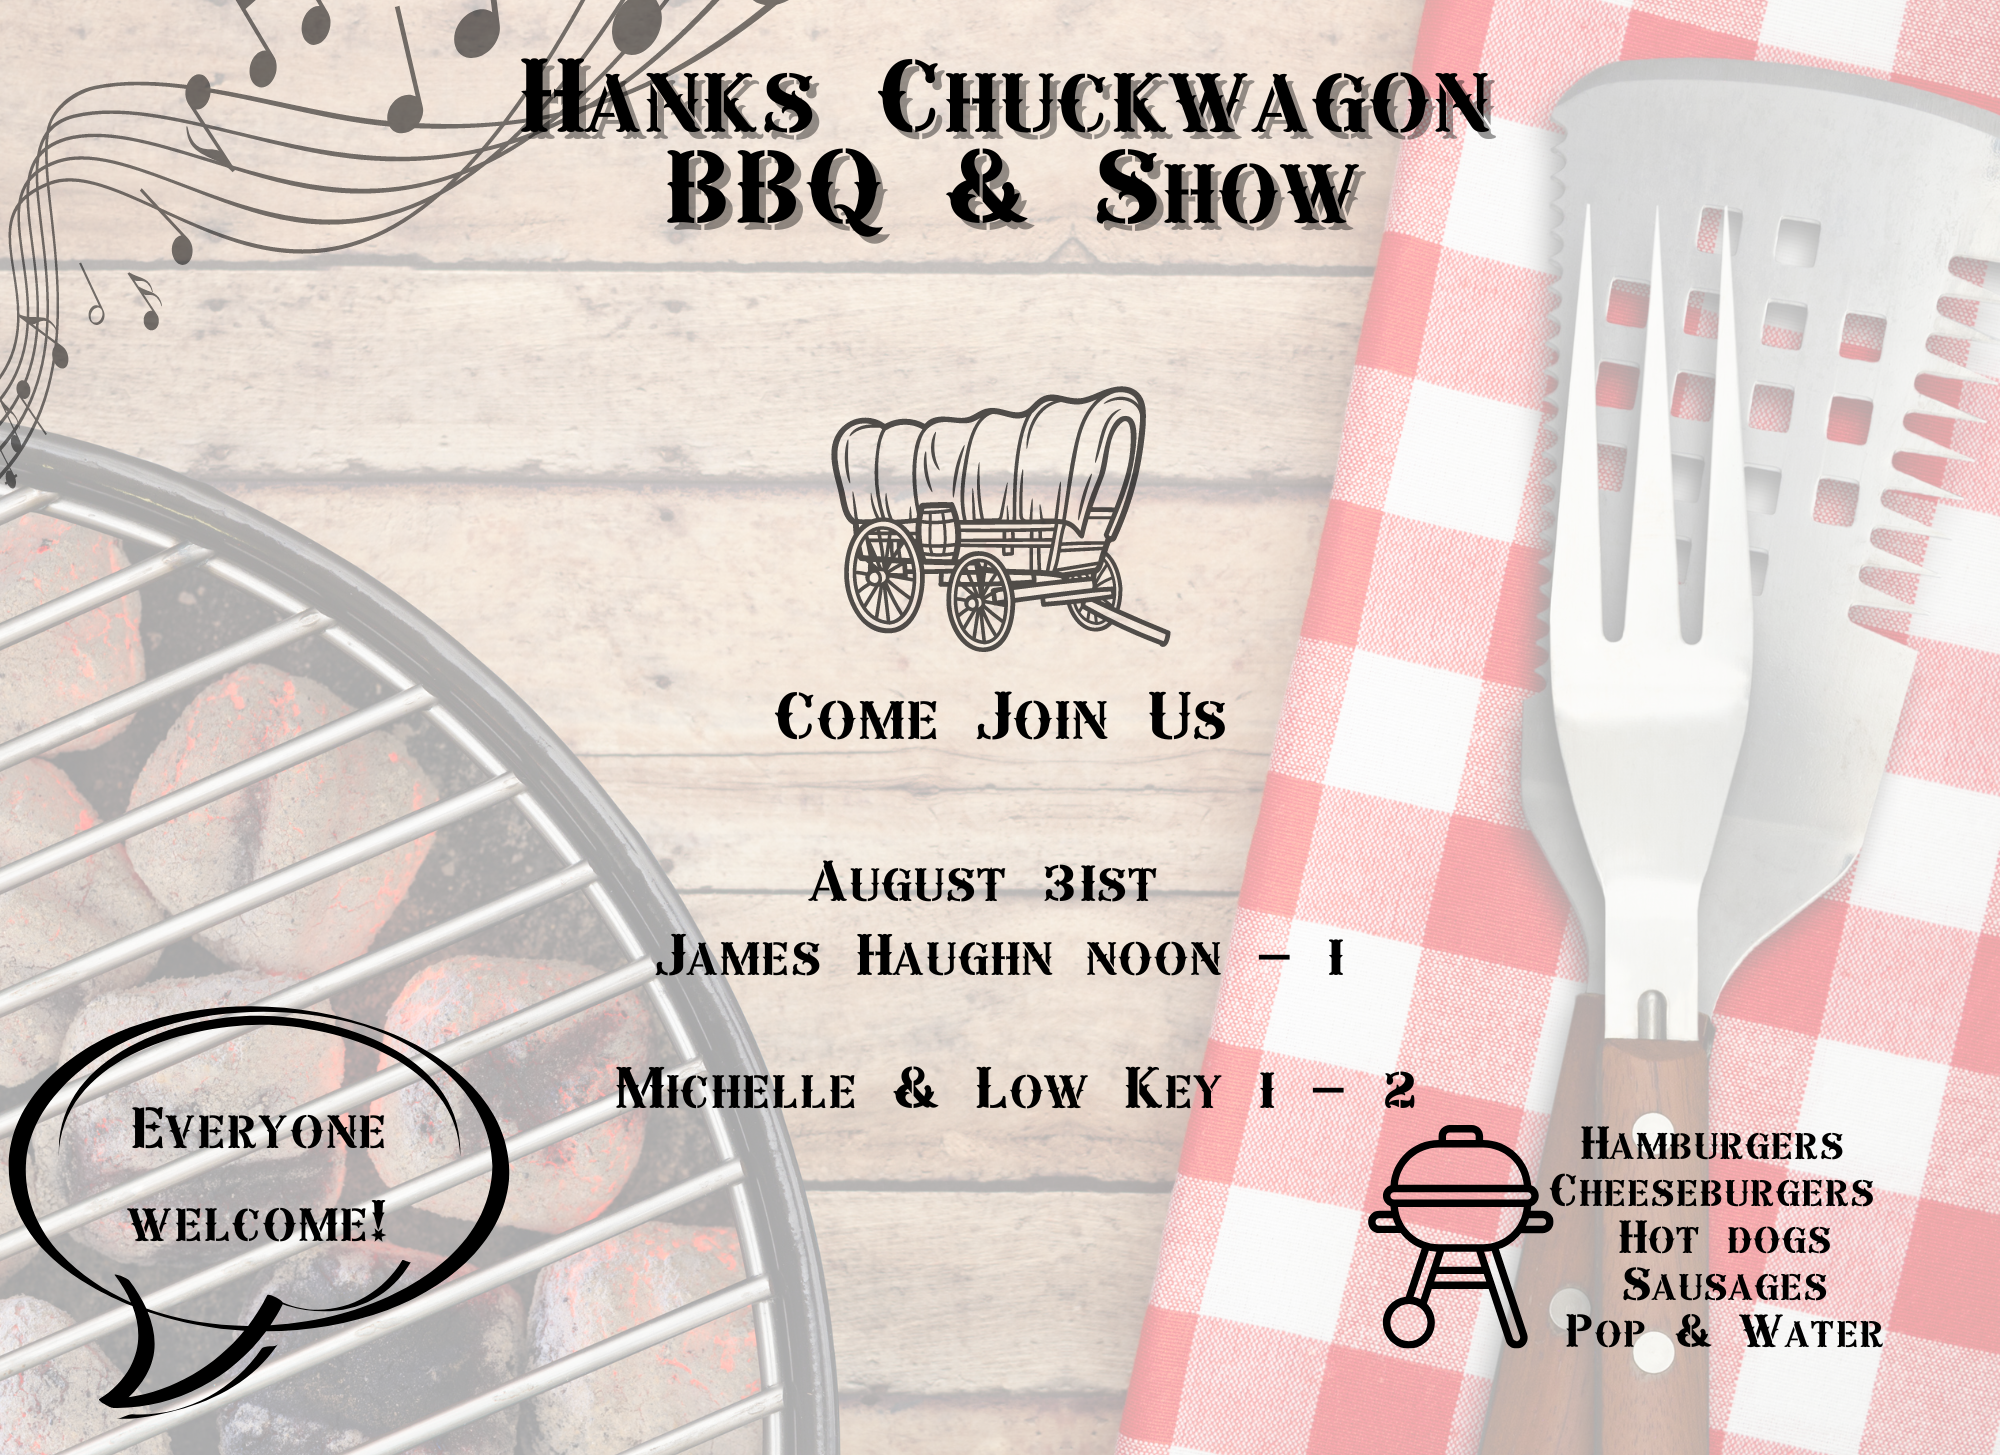 WEDNESDAY AUG 31ST  BBQ & SHOW  FEATURES  JAMES HAUGHN NOON – 1PM  &  MICHELLE & LOW KEY 1PM – 2PM